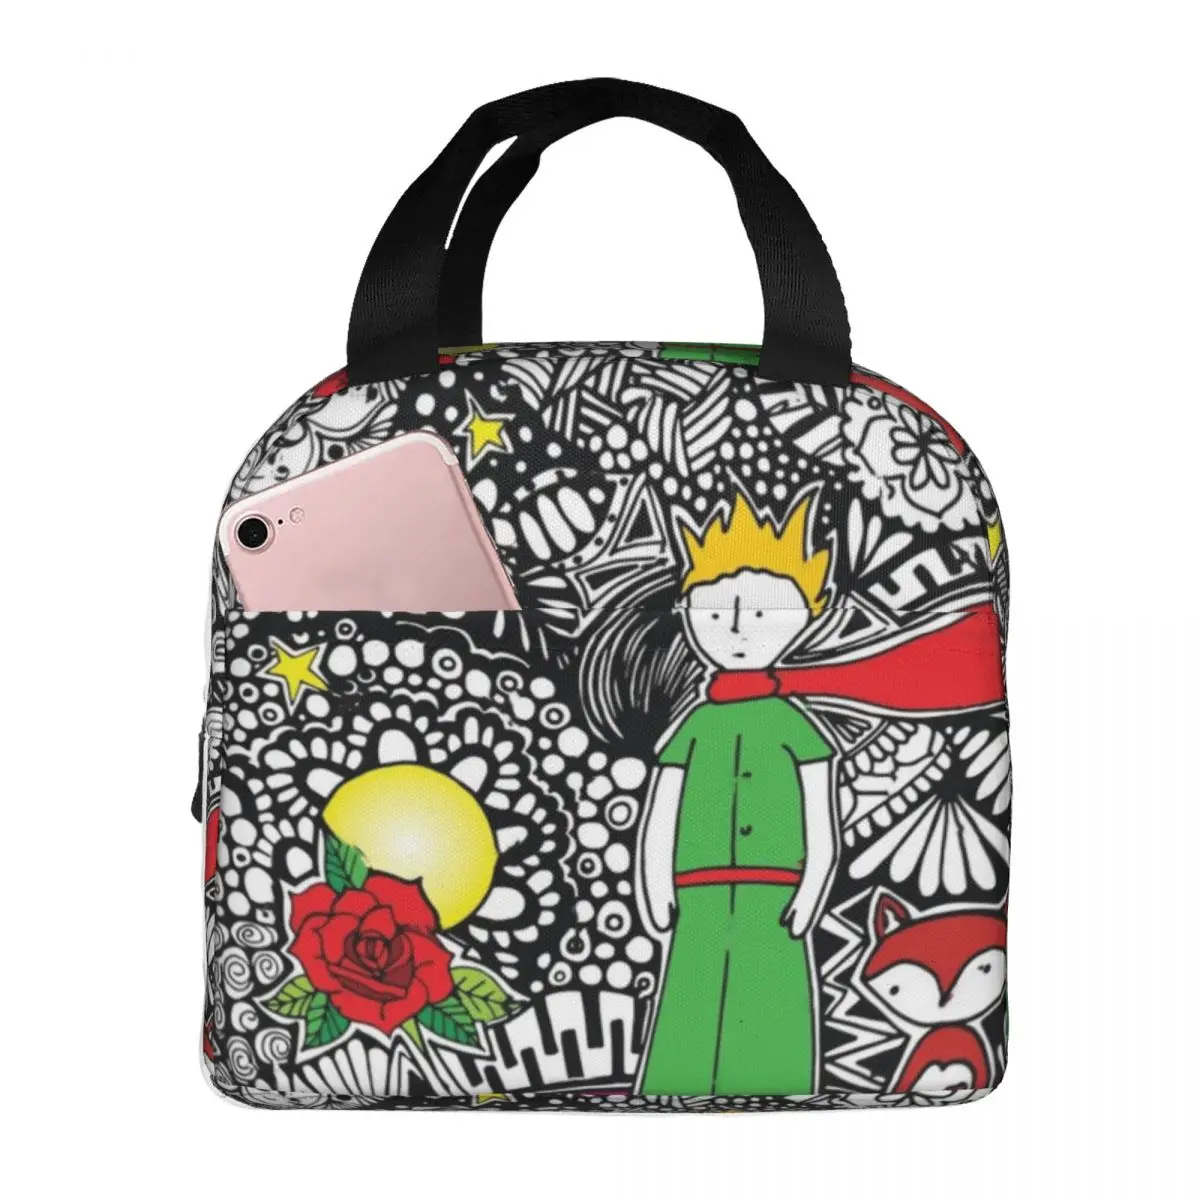 

The Little Prince Thermal Insulated Lunch Bags Reusable Bento Pouch Portable Tote Lunch Box School Teacher